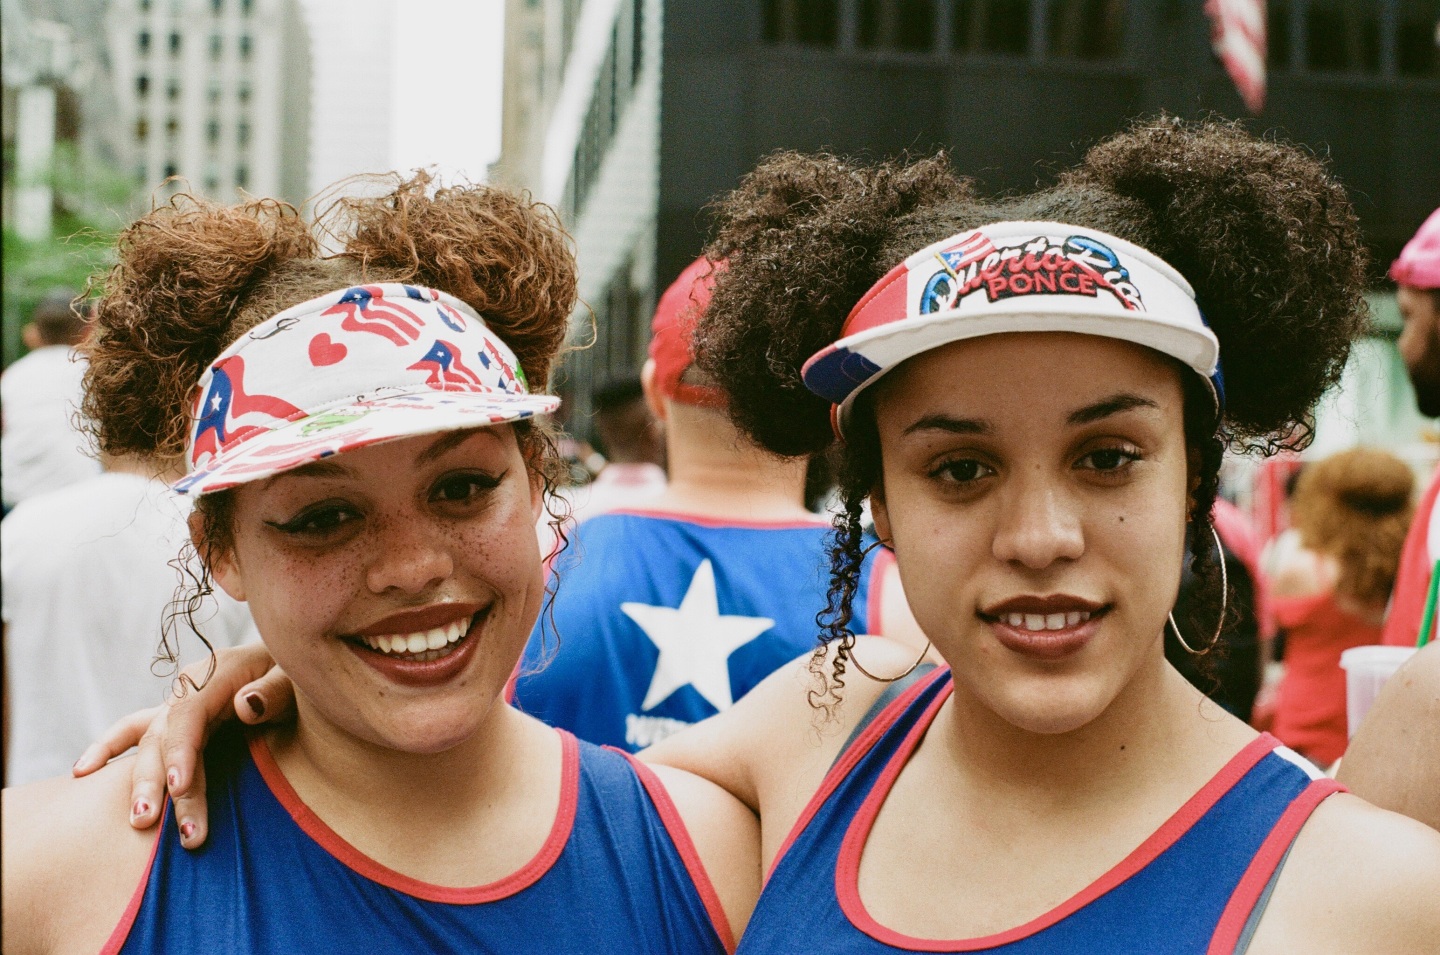 Every outfit at the Puerto Rican Day Parade was a love letter to the